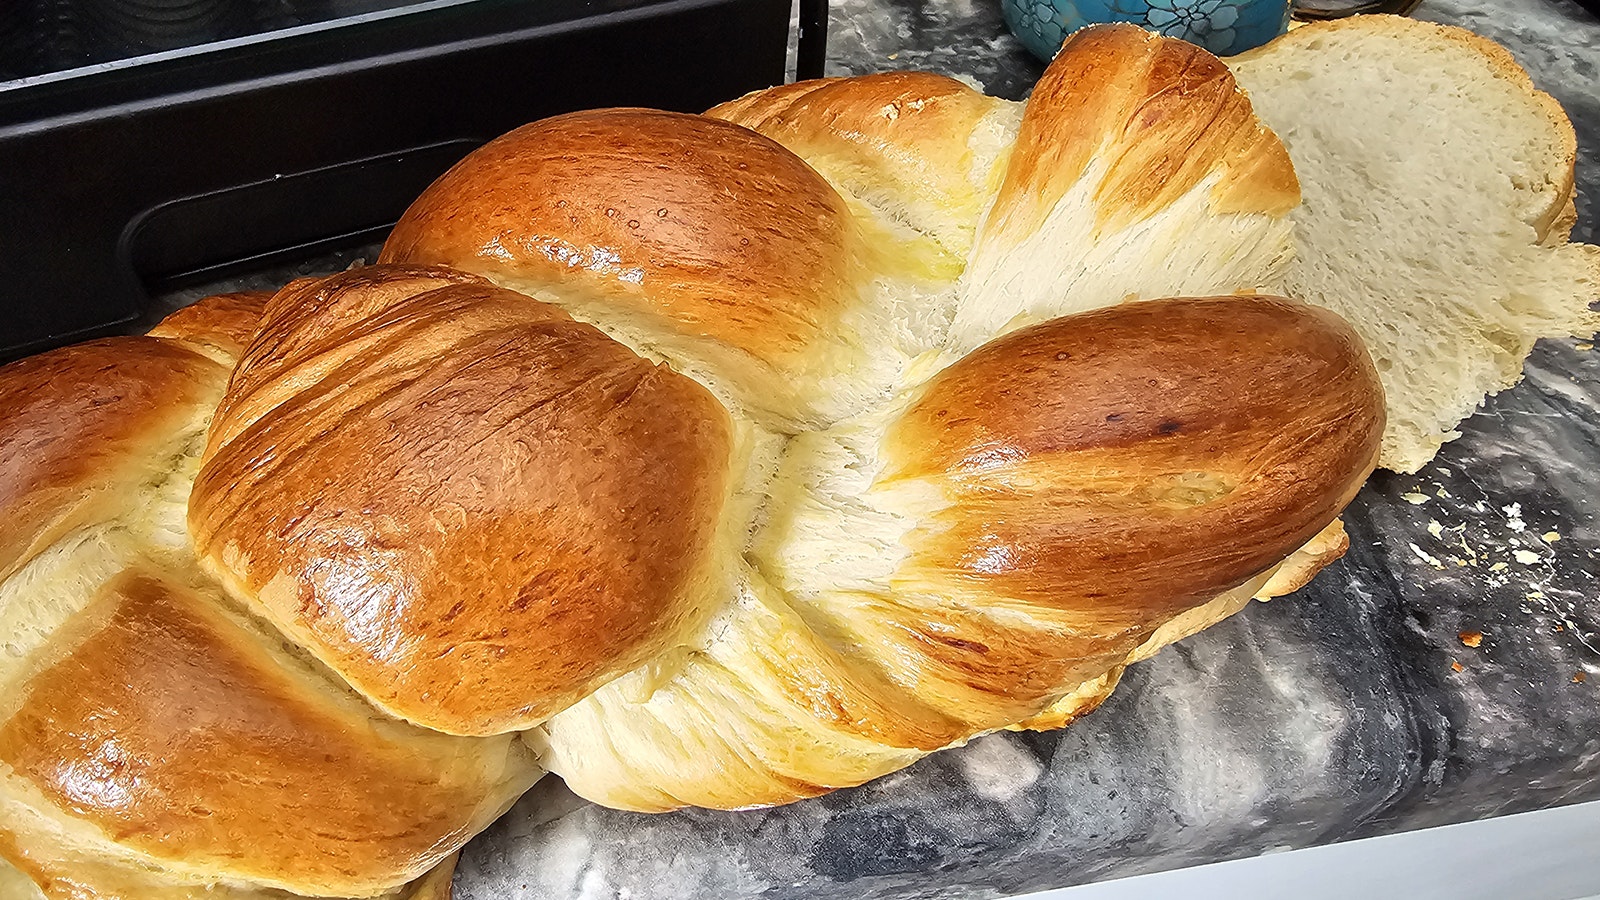 A loaf of finished butterzopf bread. Toasting each slice makes a great breakfast treat that goes well with a cup of coffee.